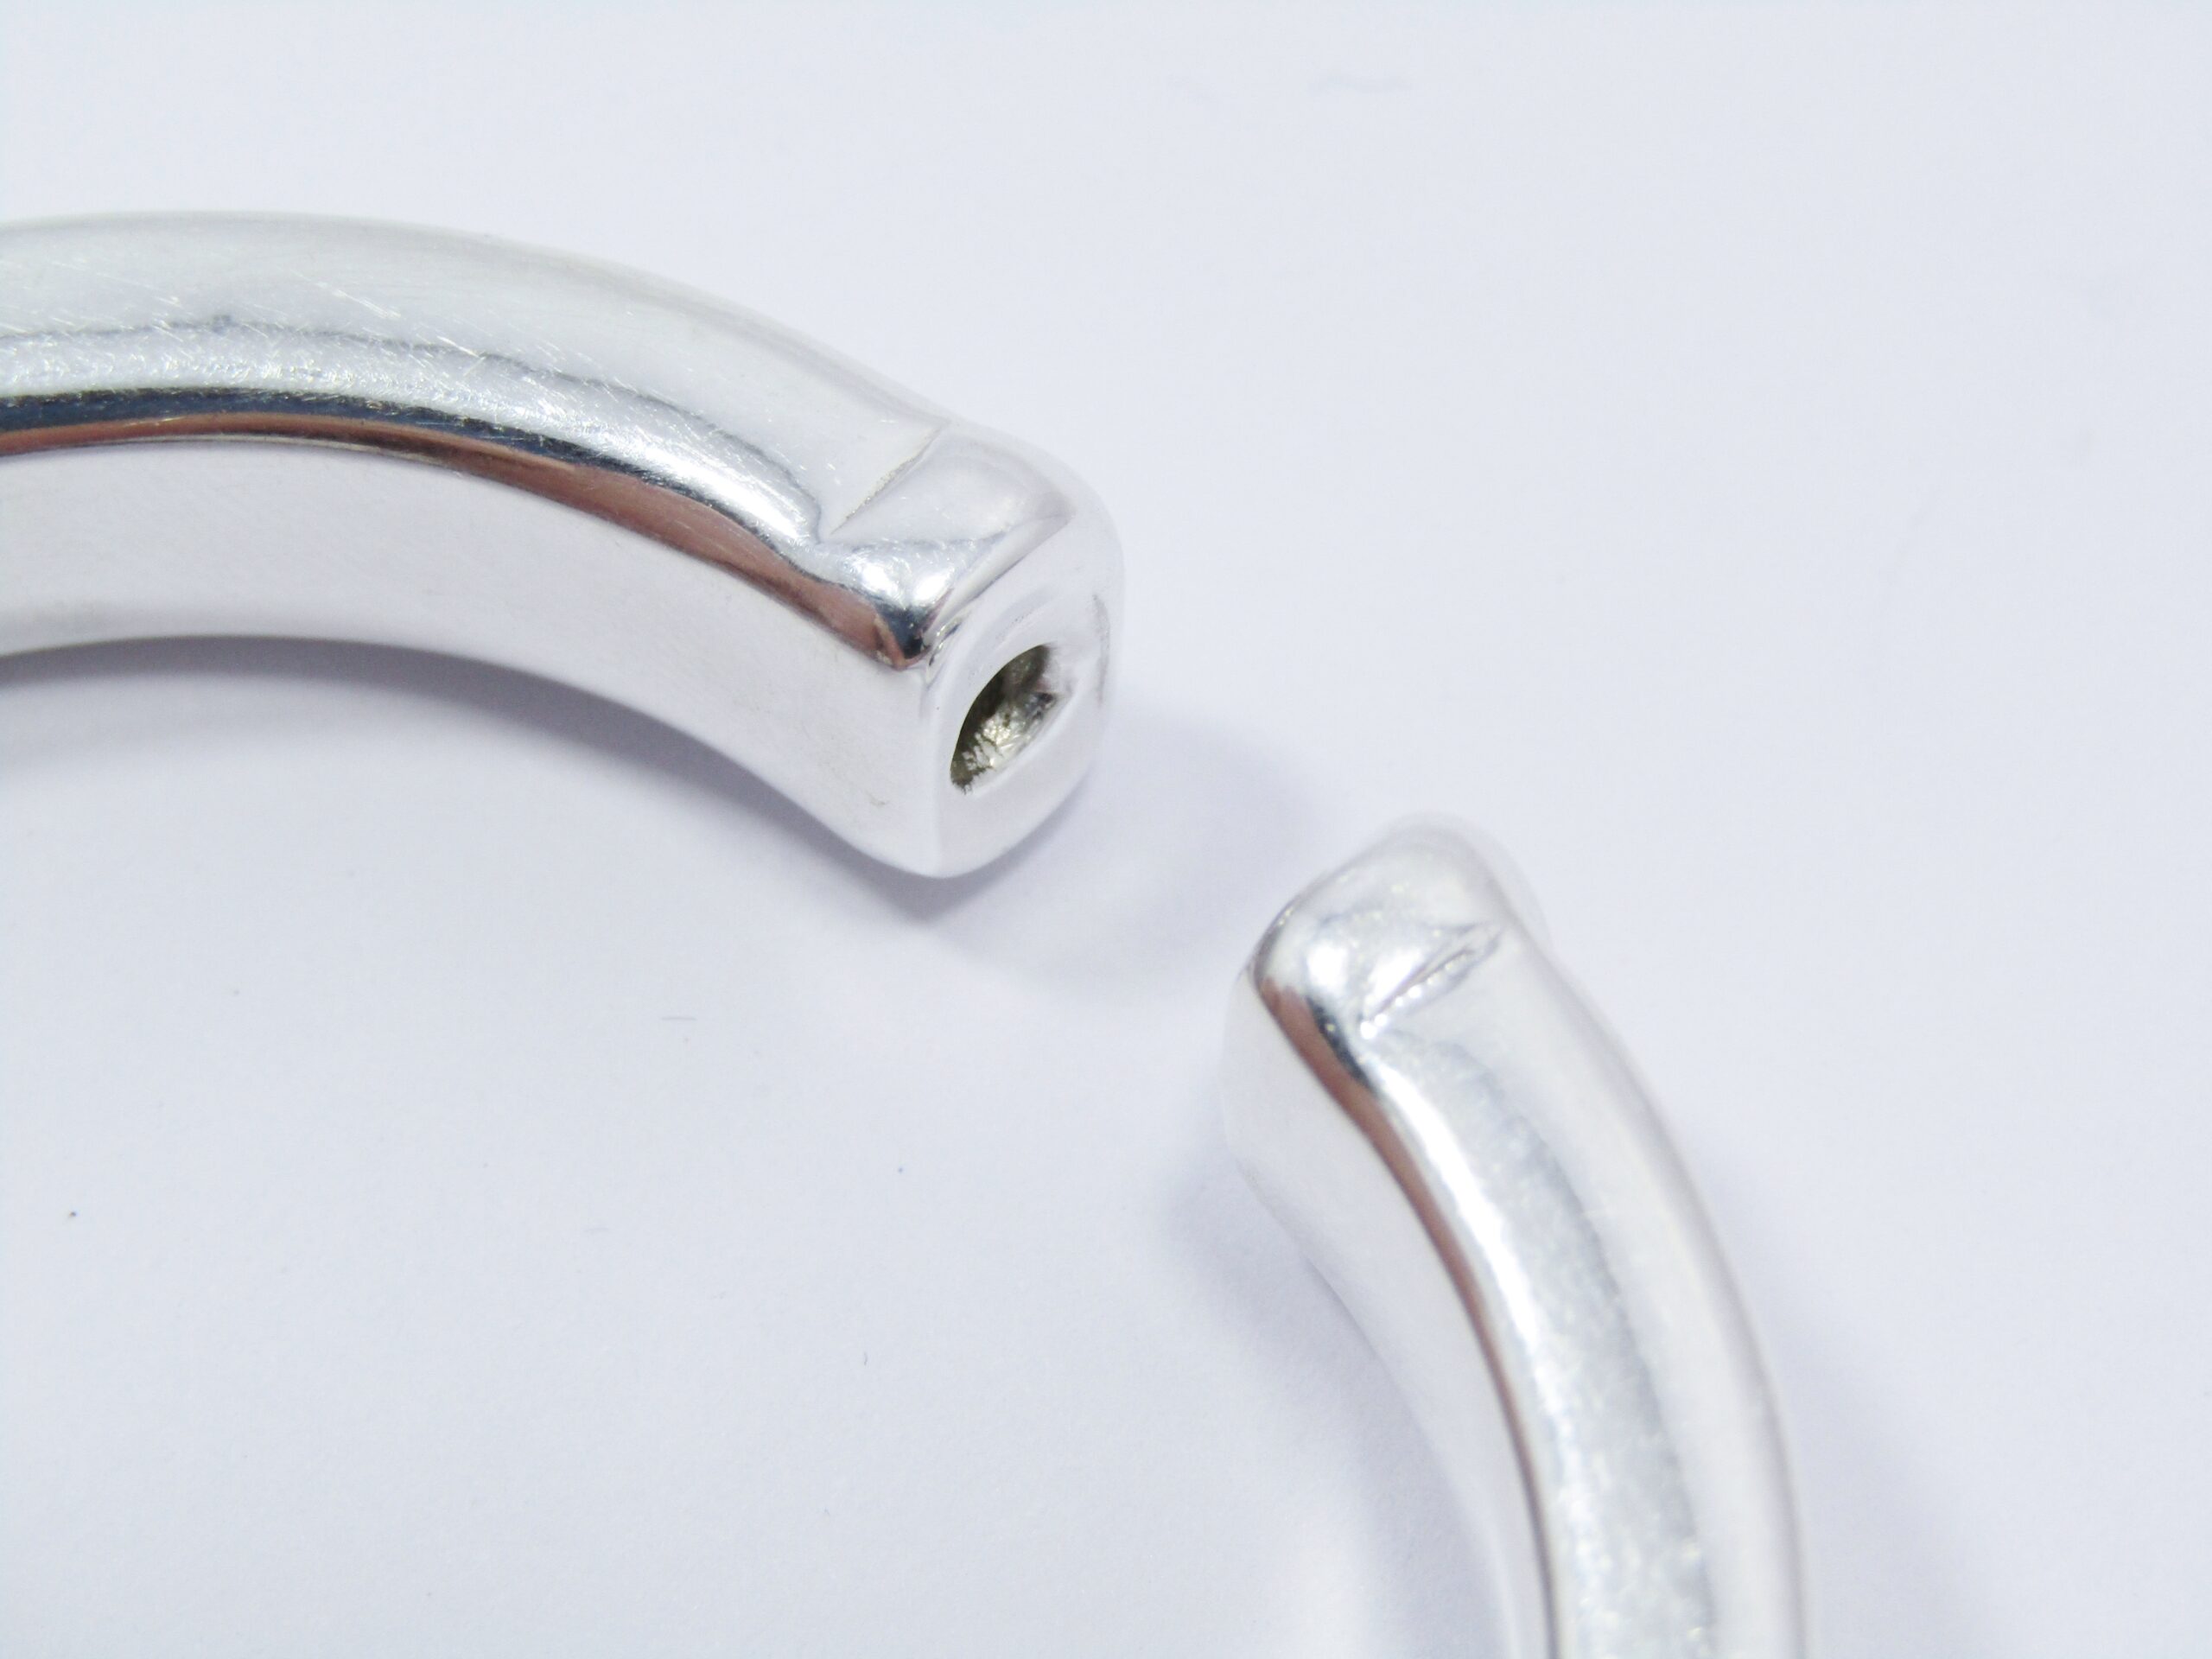 A Gorgeous Chunky Hinged Bangle in Sterling Silver